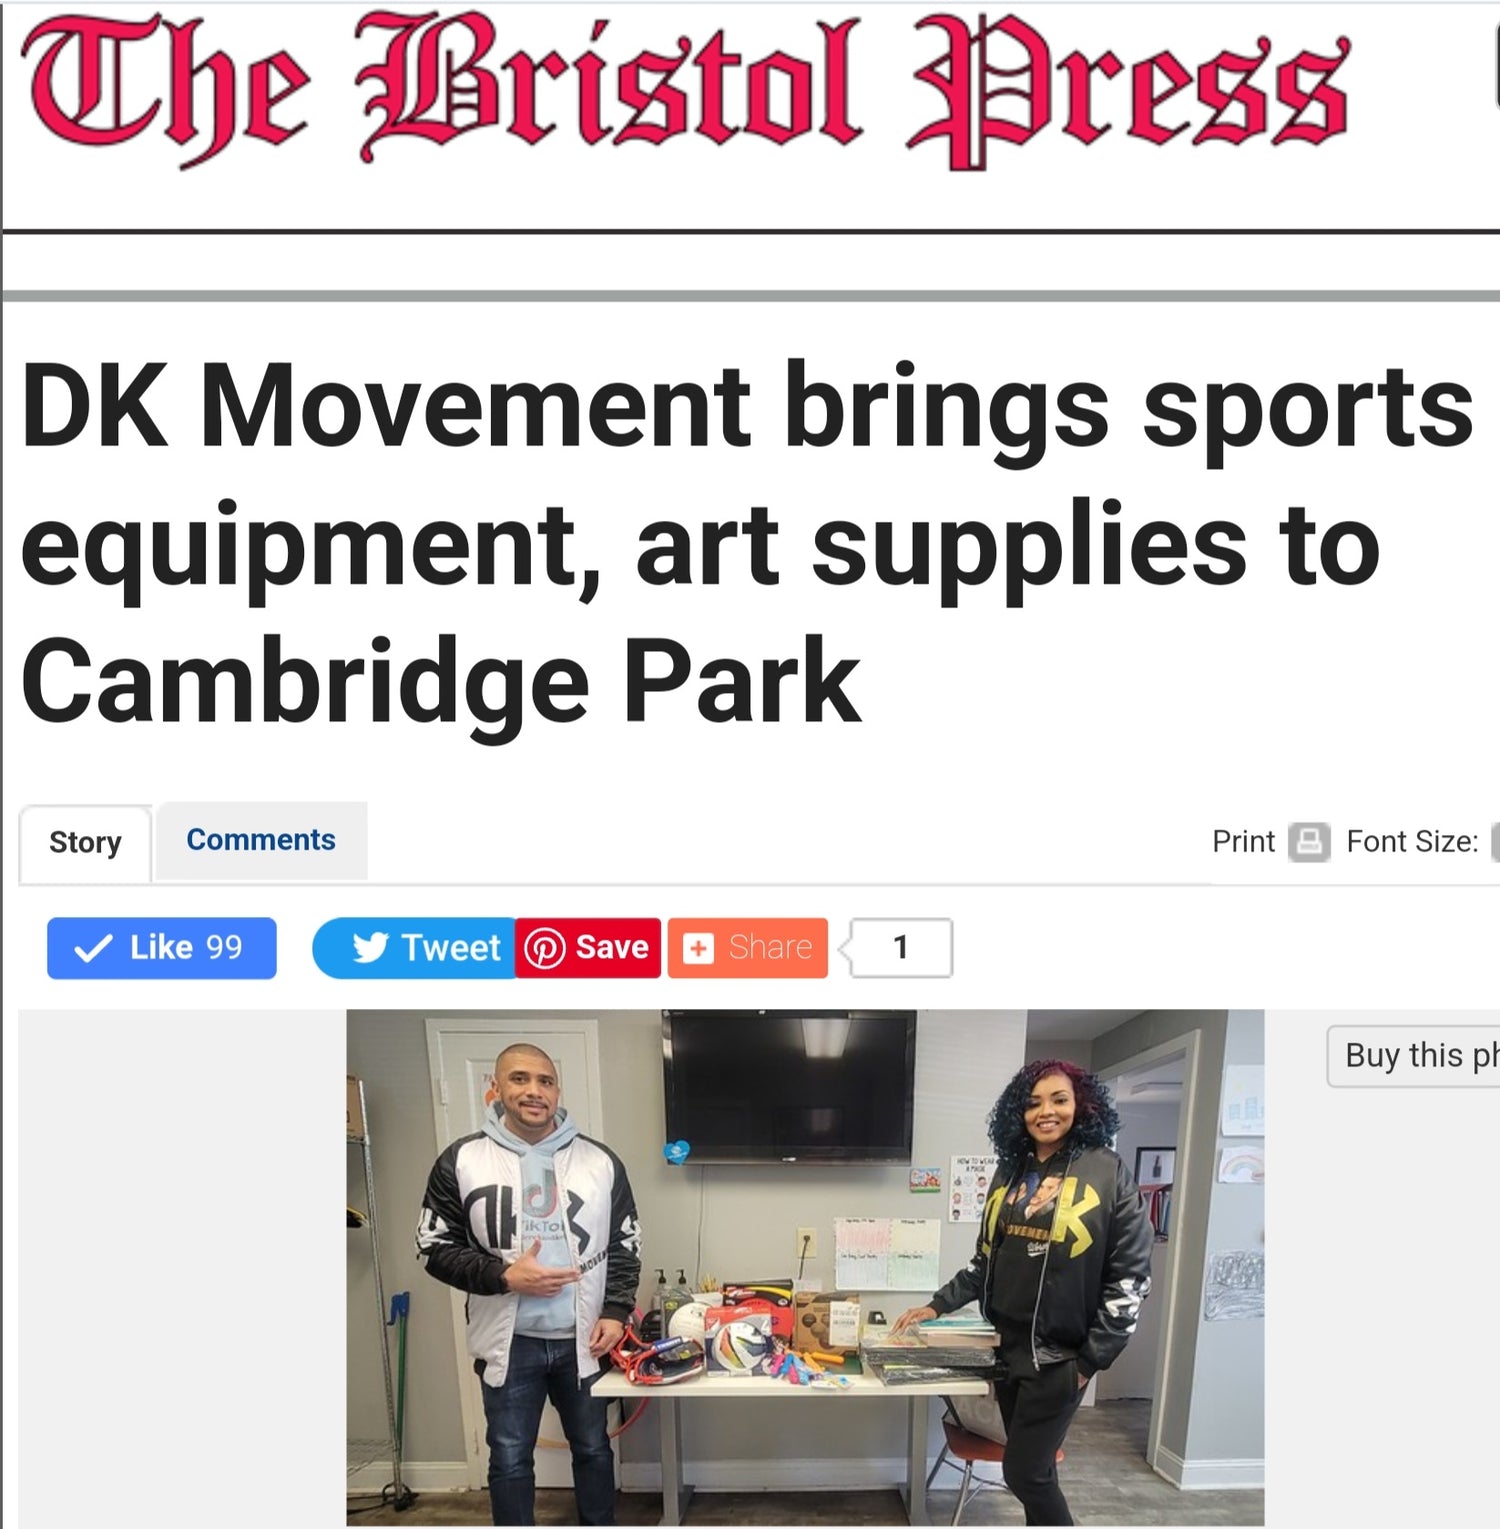 Bristol Press Article for DK Movement donating sports equipment to the Cambridge Park Bristol Boys and Girls Club